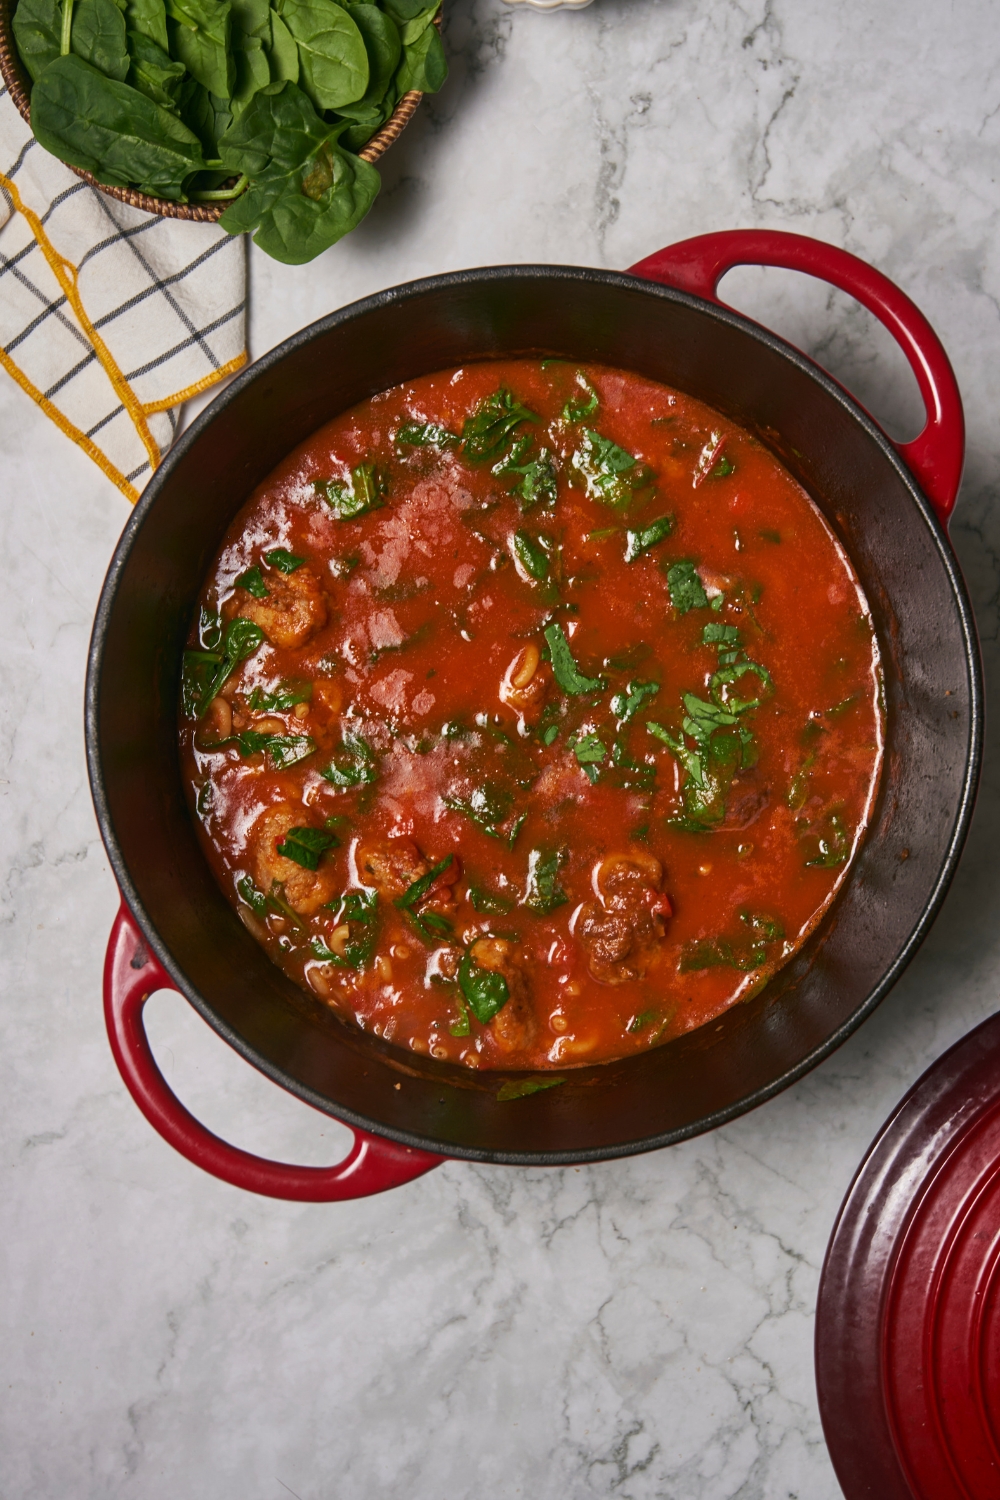 Red Dutch oven filled with meatballs in a tomato sauce and spinach has been added to the pot.